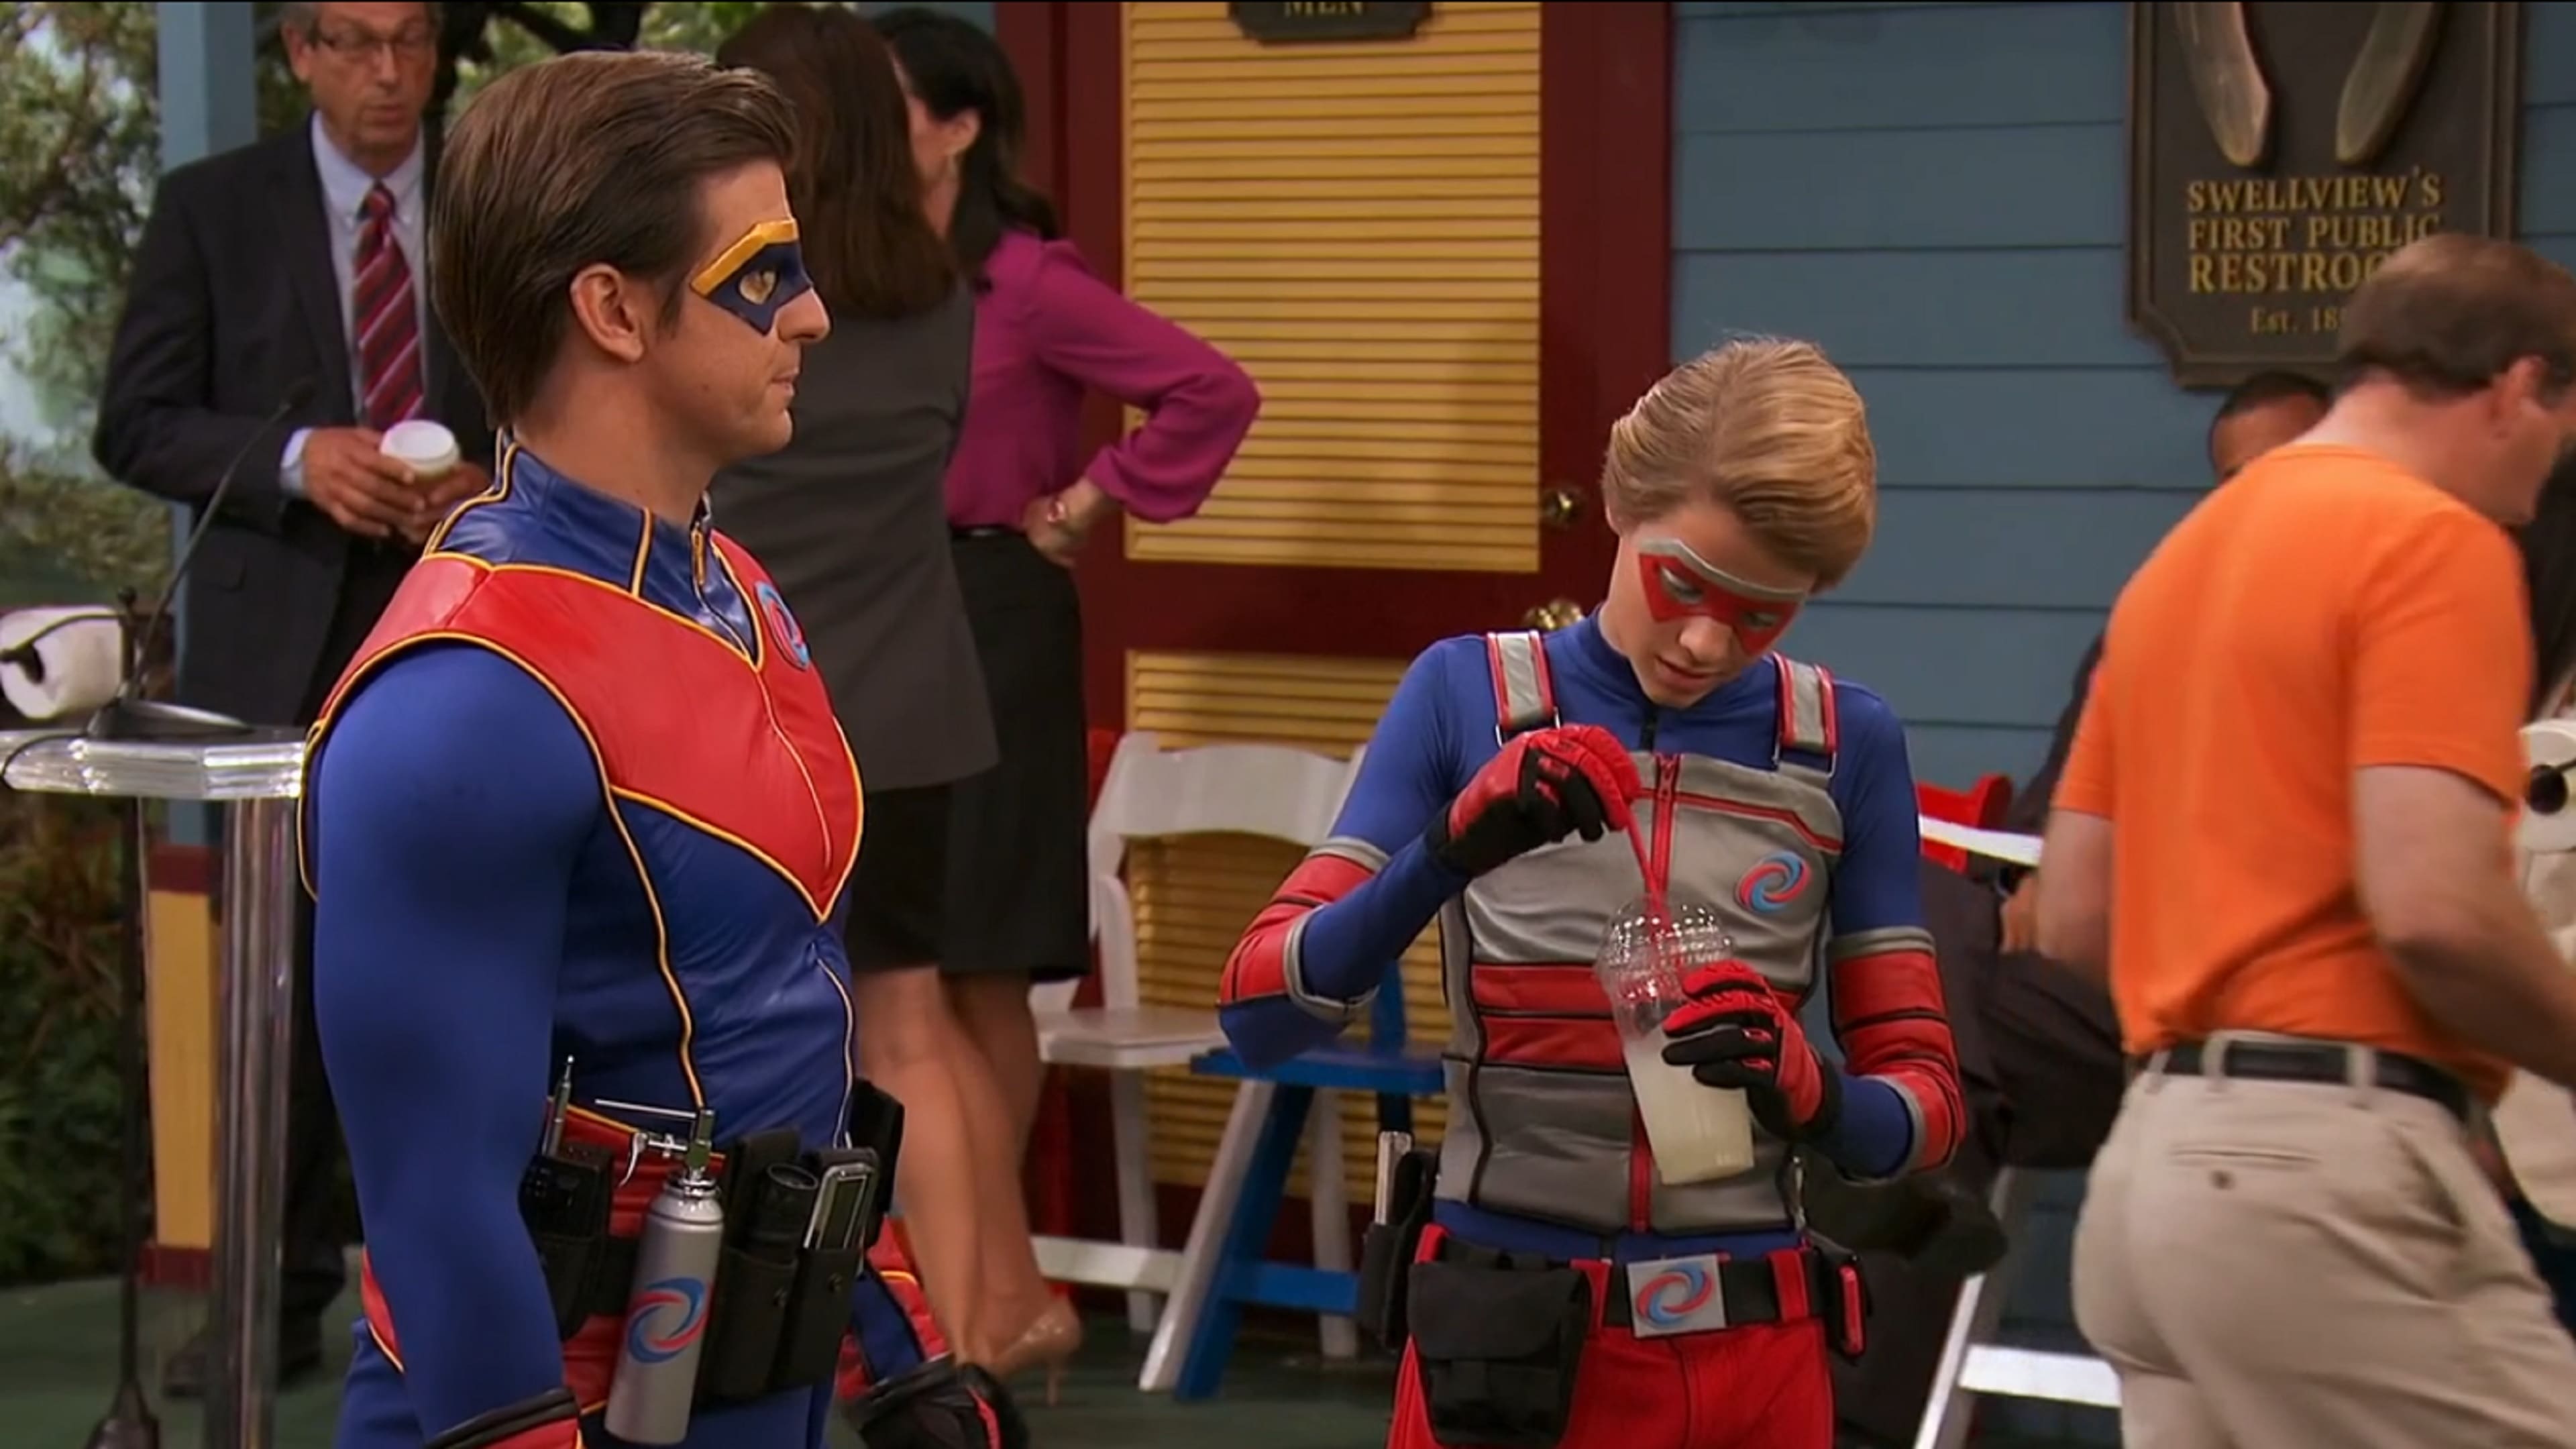 Where To Watch All Seasons Of Henry Danger Watch Henry Danger Season 2 Episode 2 Full HD - 123movies